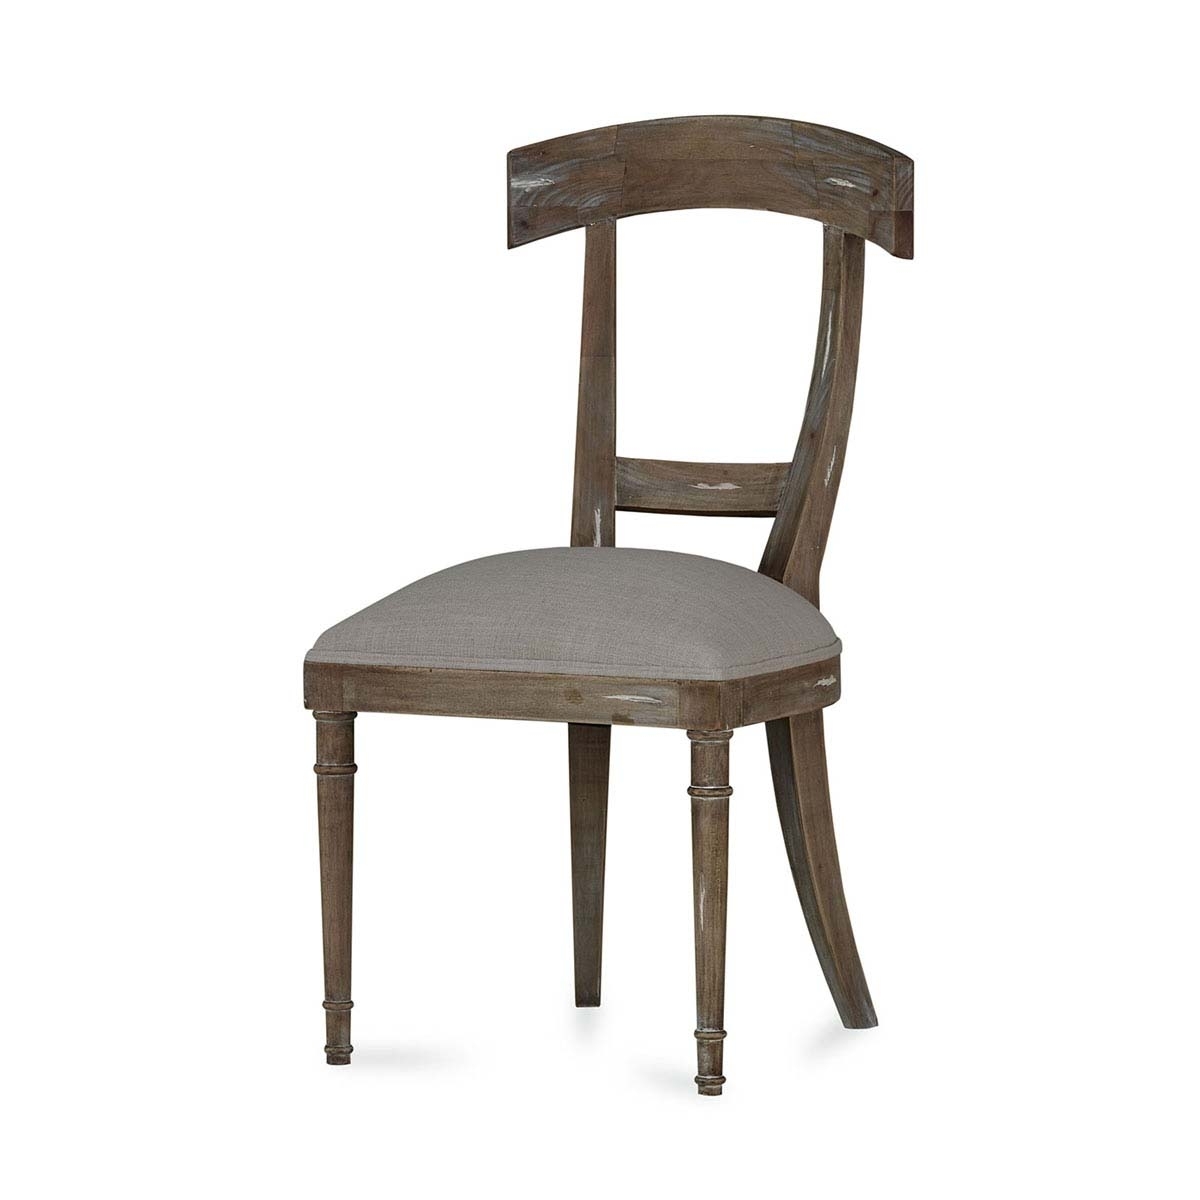 Hoxton Chair w/ Tin & Upholstery